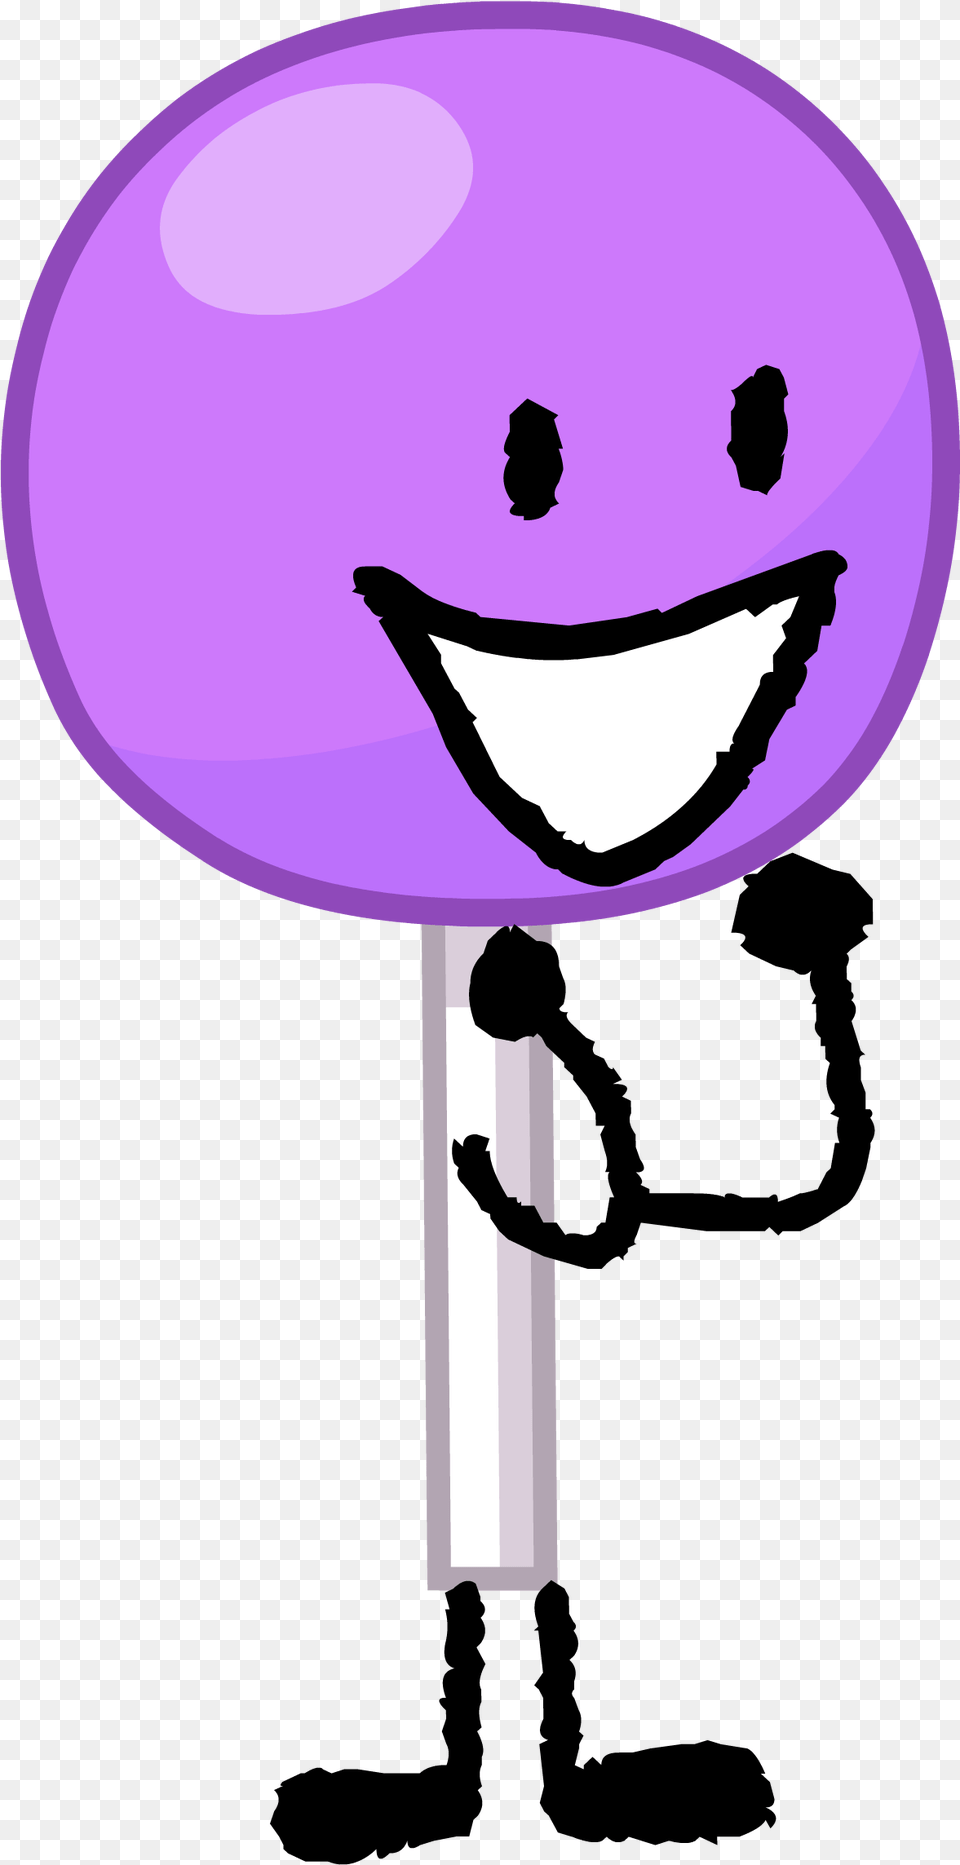 Clip Art Battle For Dream Island Lollipop Bfb Characters, Candy, Food, Purple, Sweets Png